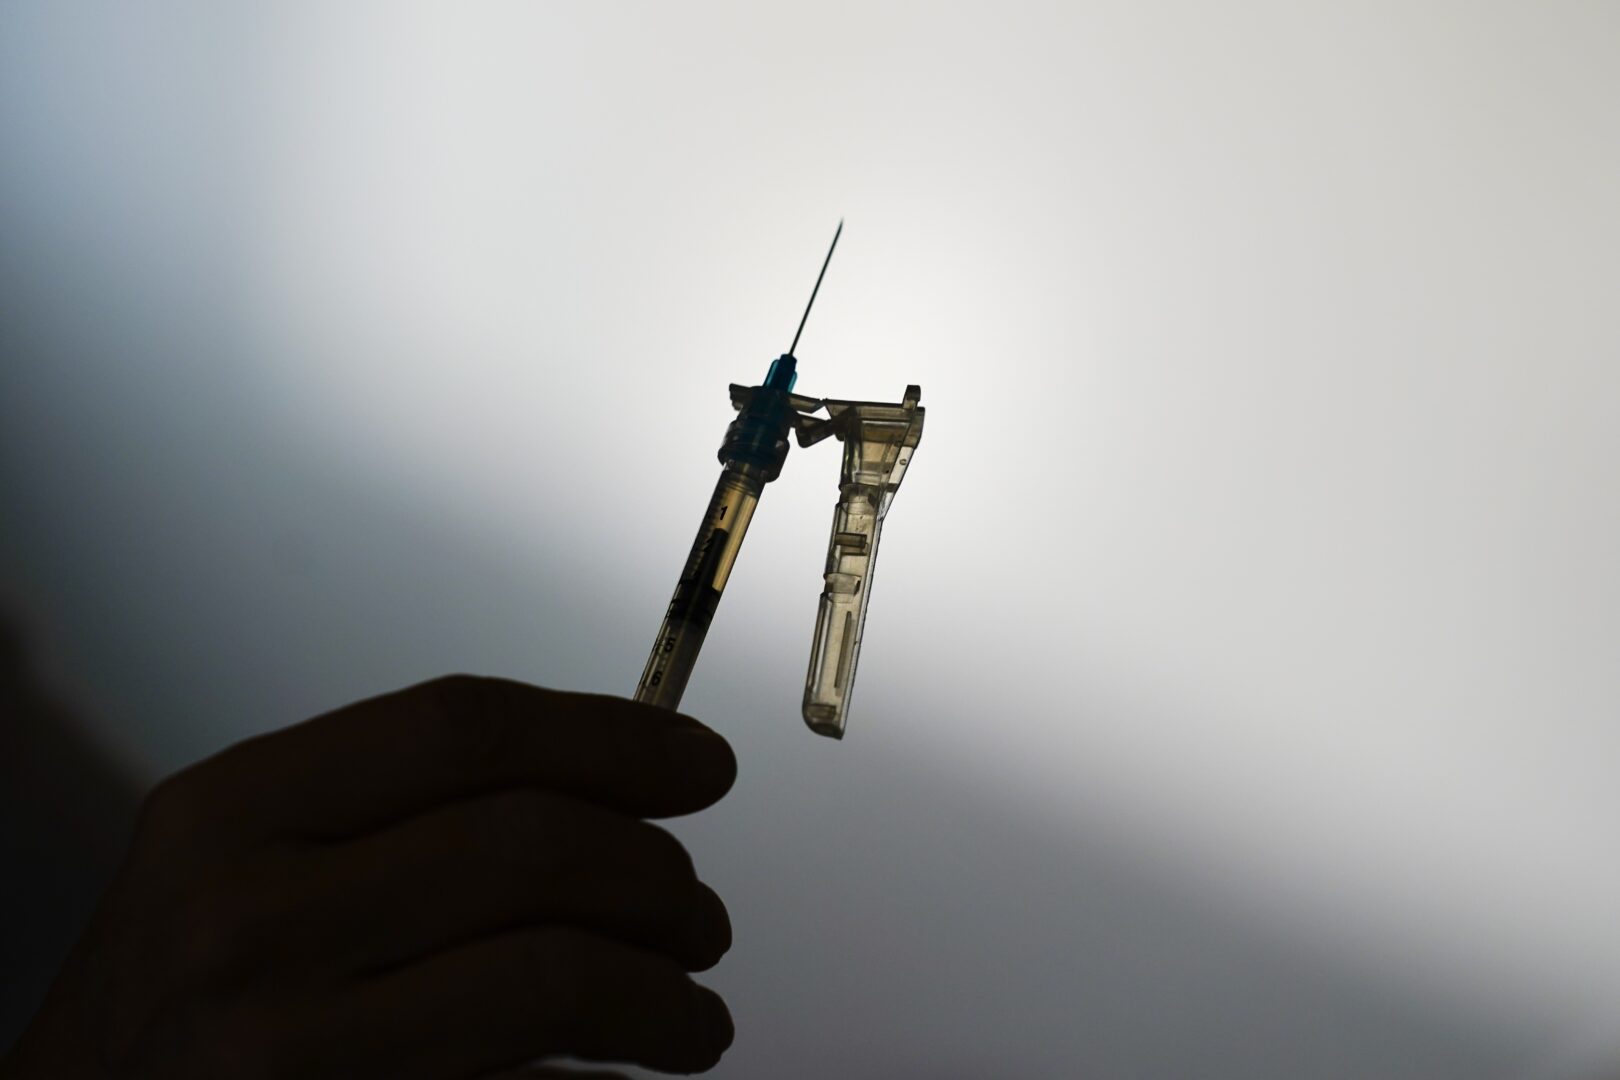 A syringe is prepared at a clinic in Norristown, Pa., Dec. 7, 2021. The Environmental Protection Agency is warning residents in 13 states and Puerto Rico about potential health risks from emissions of ethylene oxide, a chemical widely used to sterilize medical equipment and decontaminate spices. 